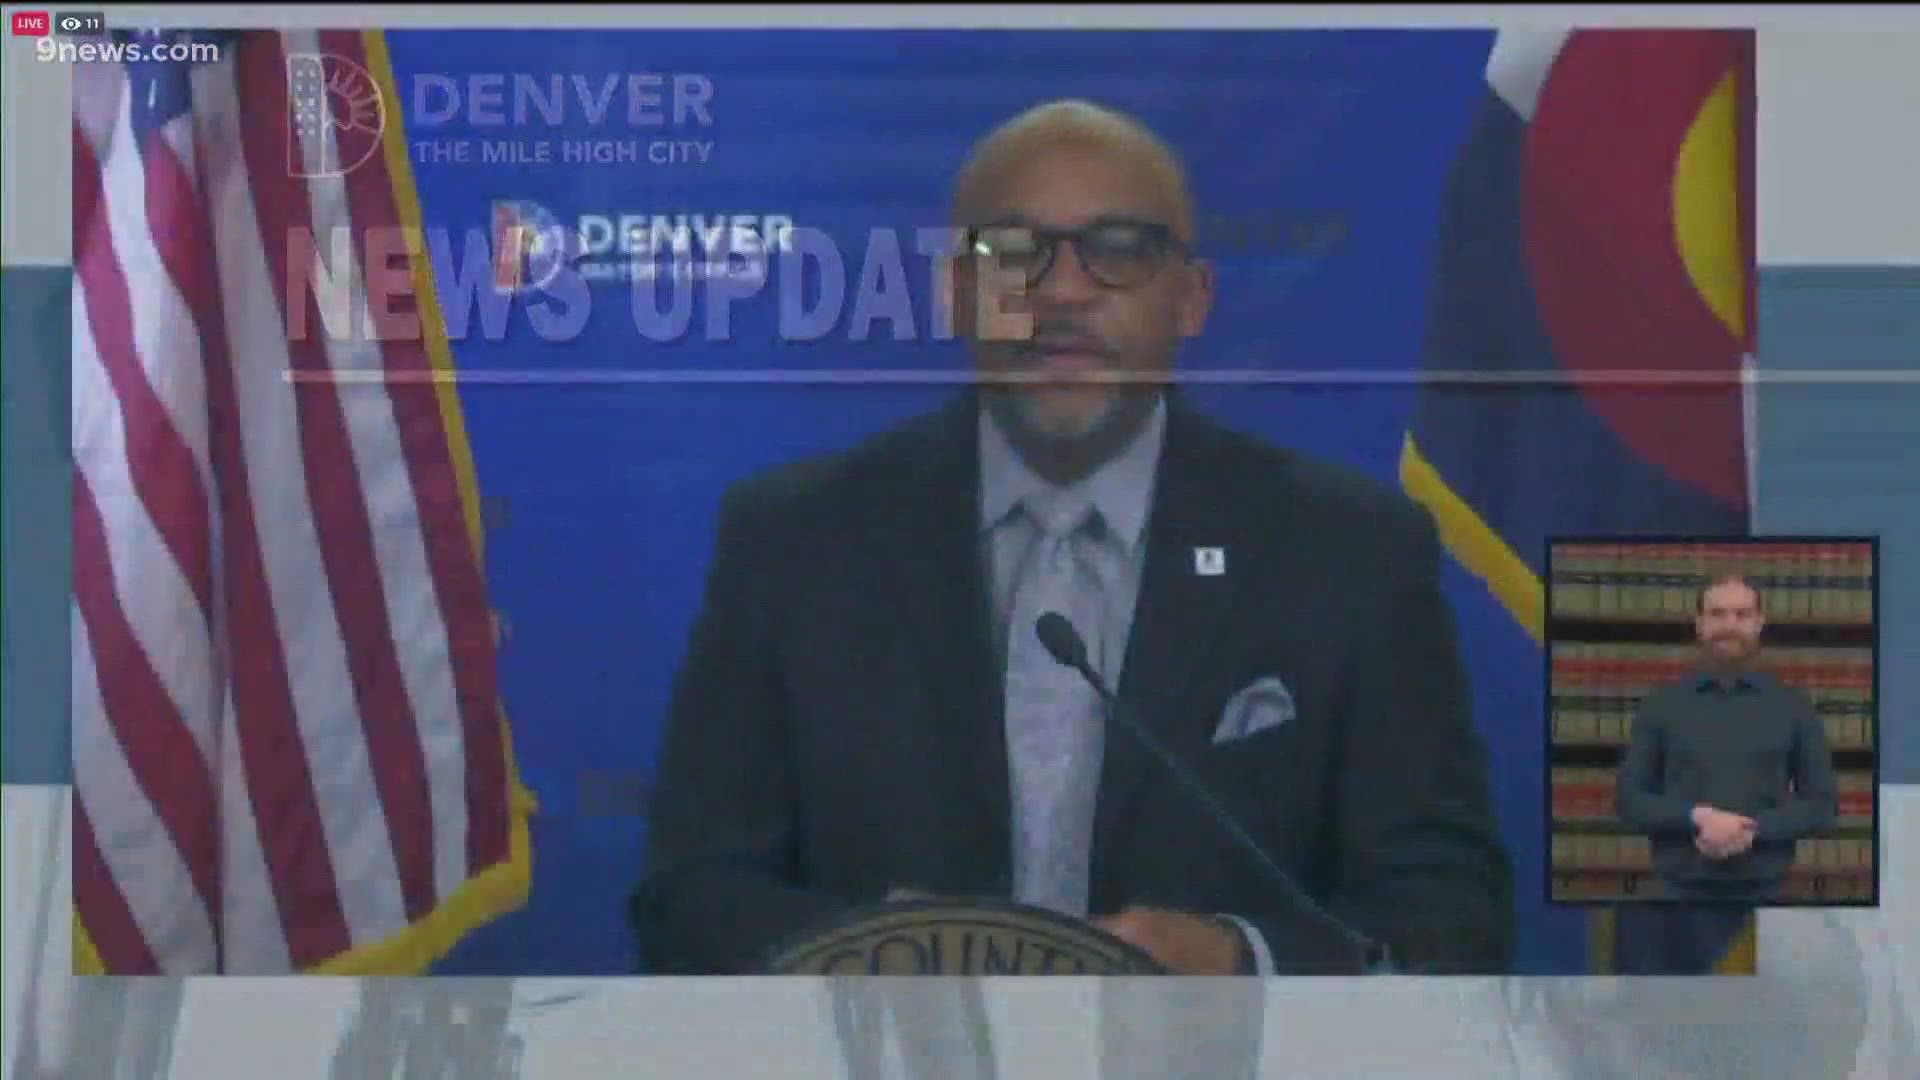 The mayor discussed vaccine distribution in Denver during a Thursday news conference.